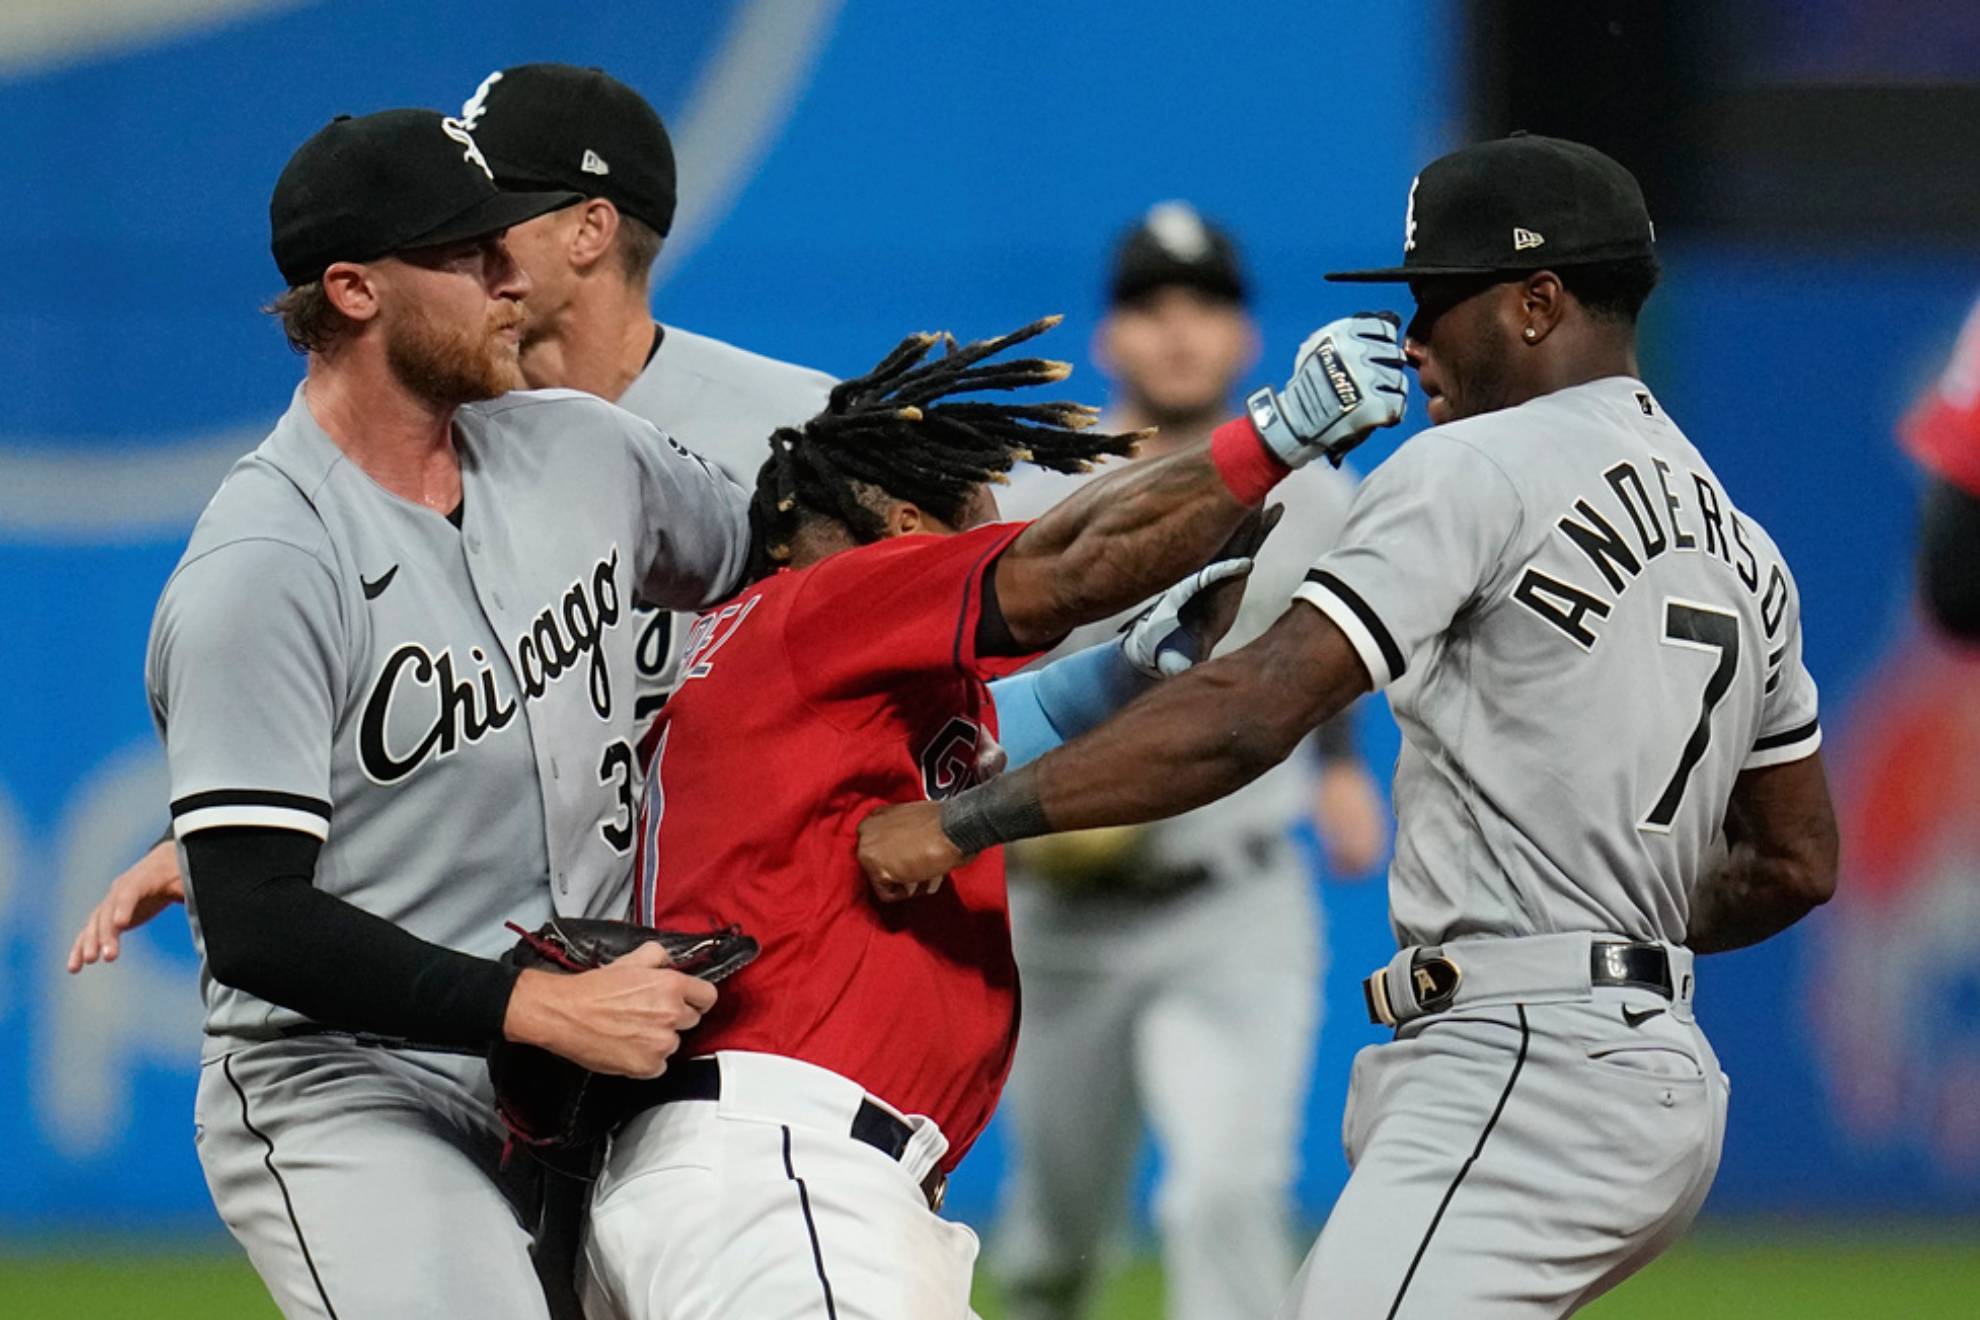 Cleveland Guardians Jose Ramirez, center, and Chicago White Soxs Tim Anderson (7) exchange punches in the sixth inning of a baseball game